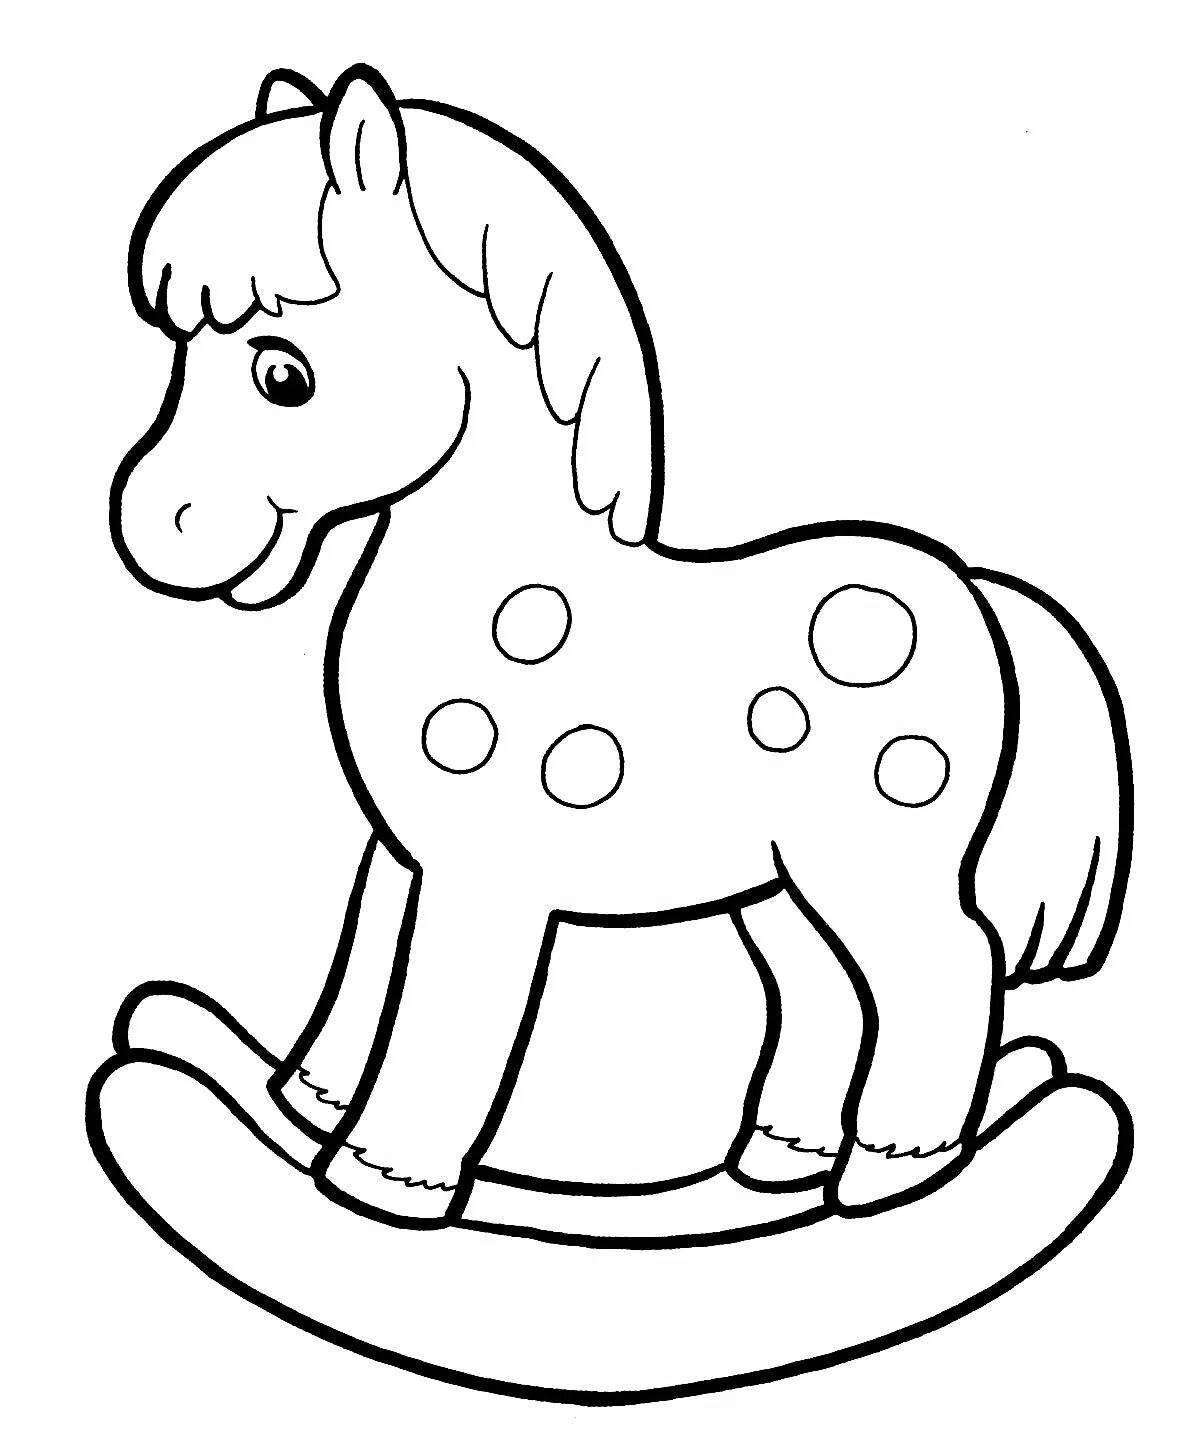 Major horse coloring book for 4-5 year olds